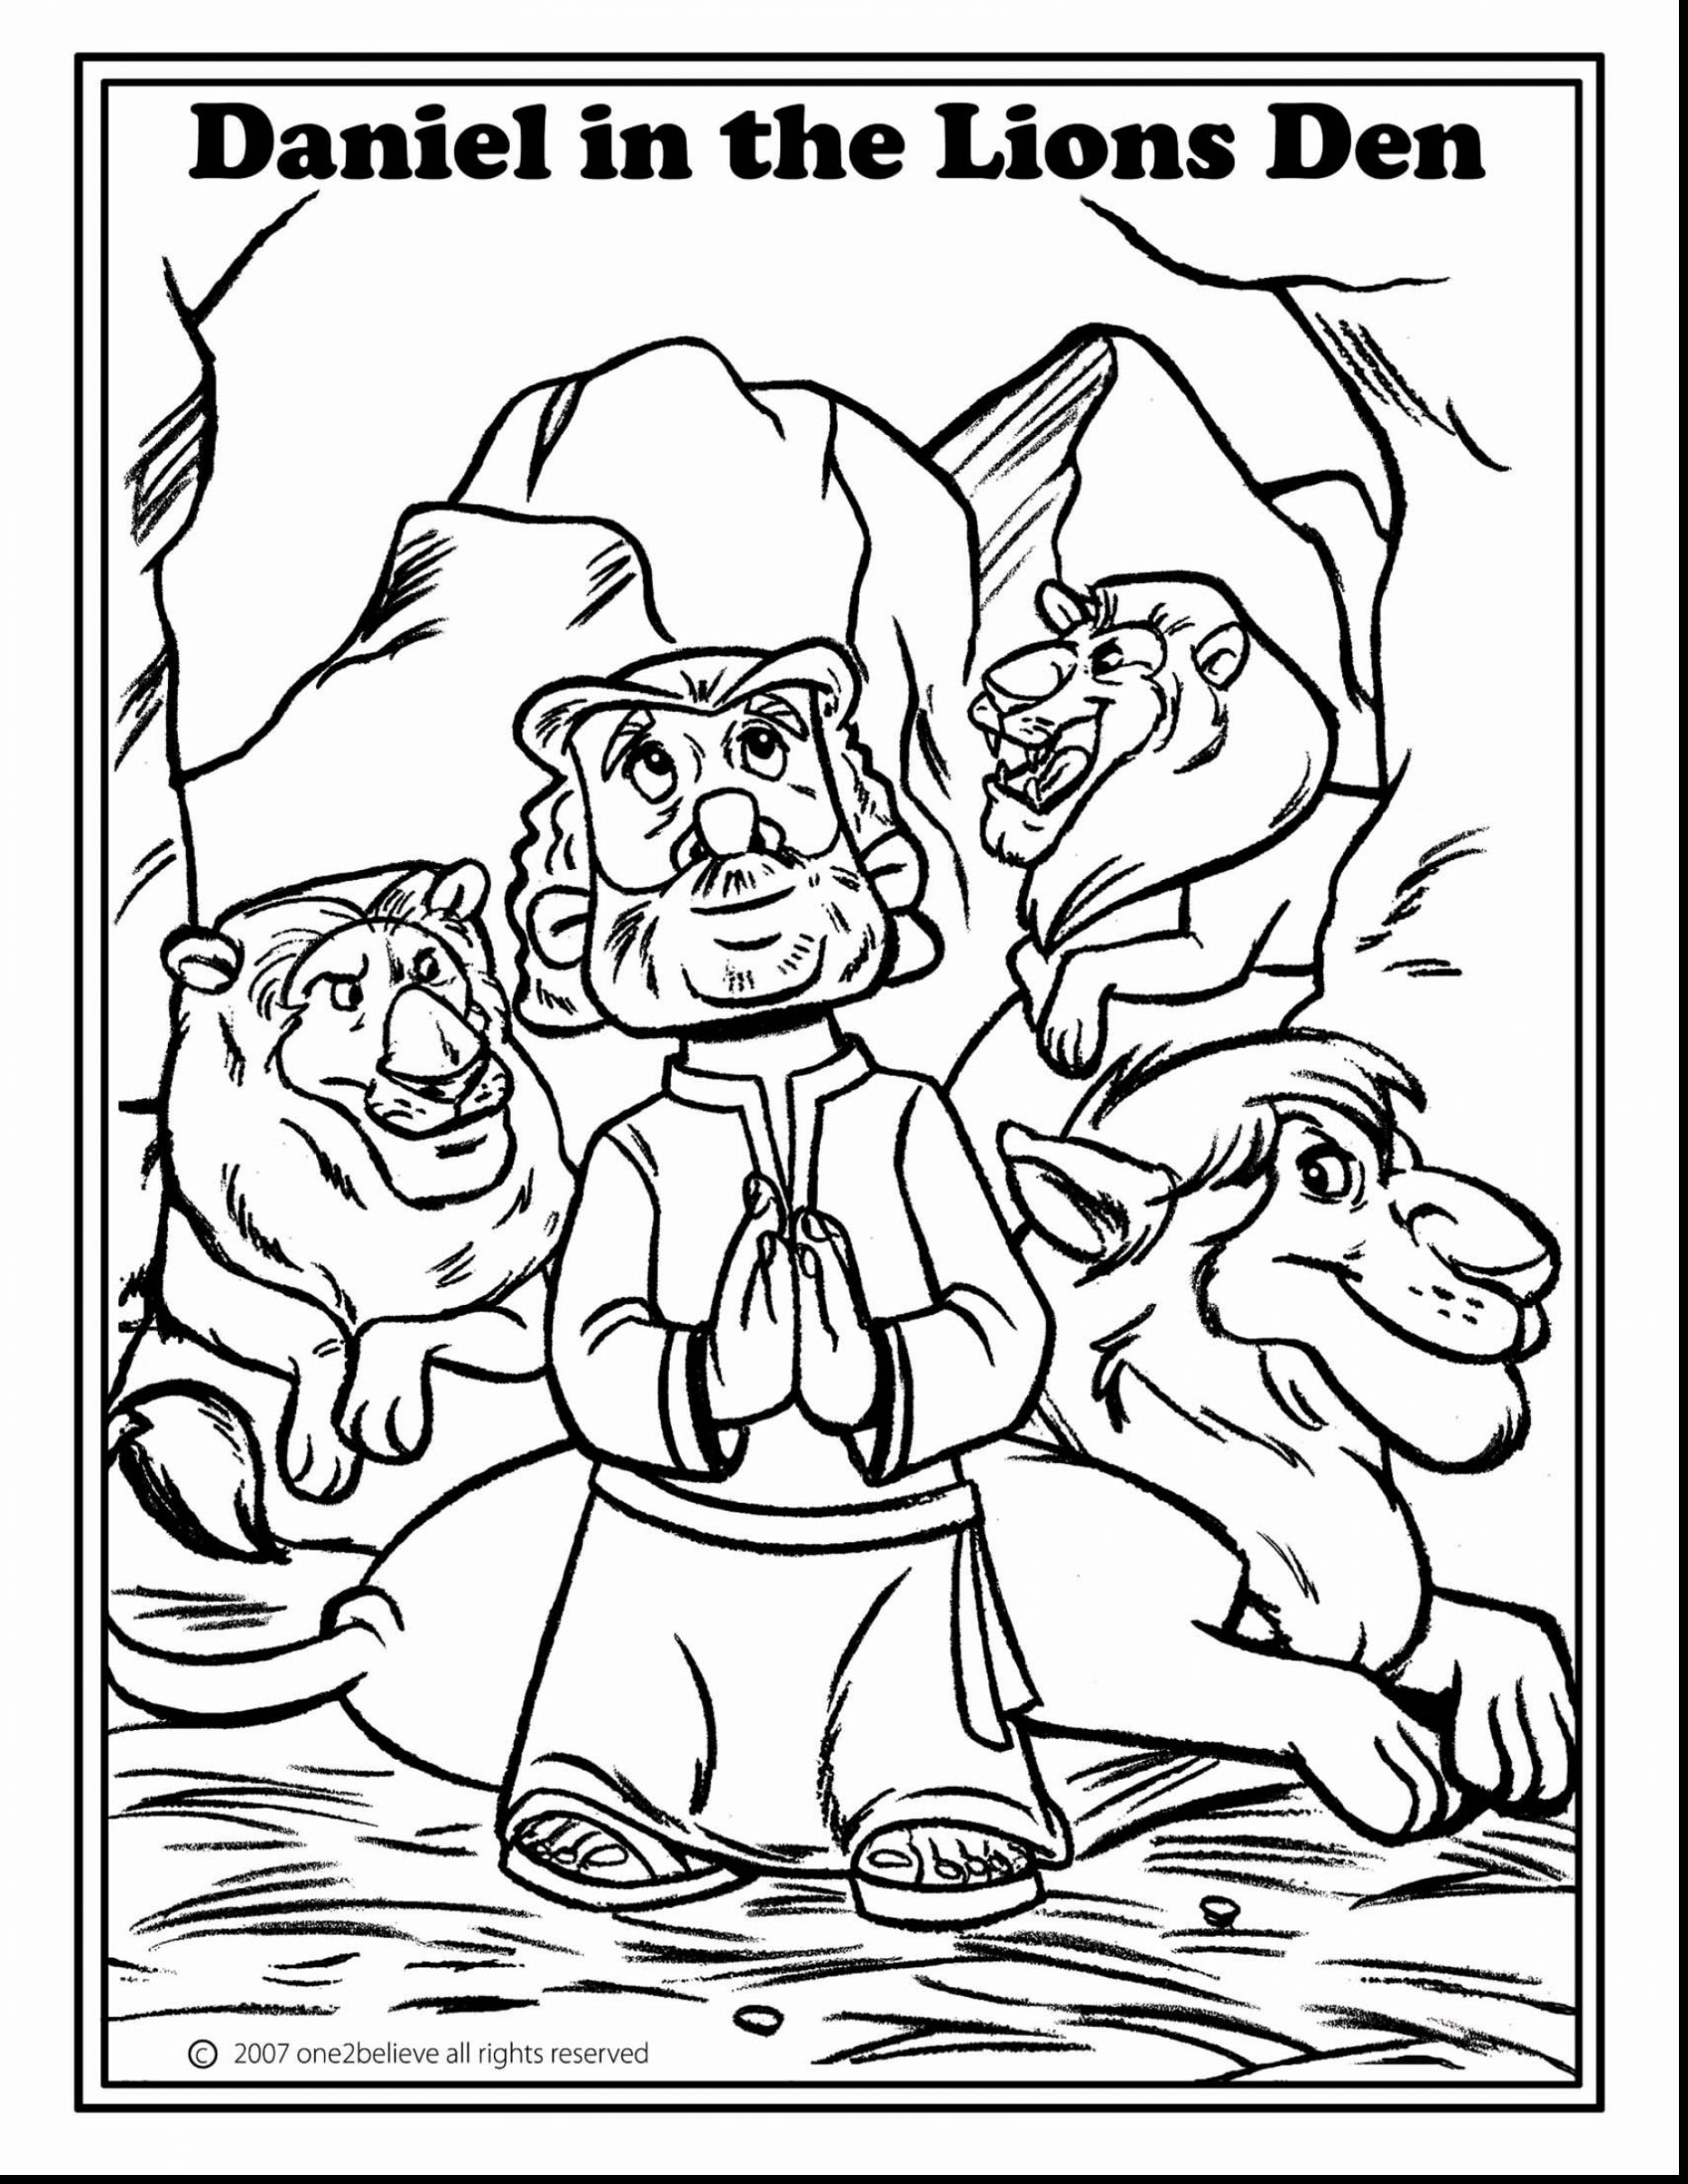 daniel-in-the-lions-den-coloring-page-at-getdrawings-free-download